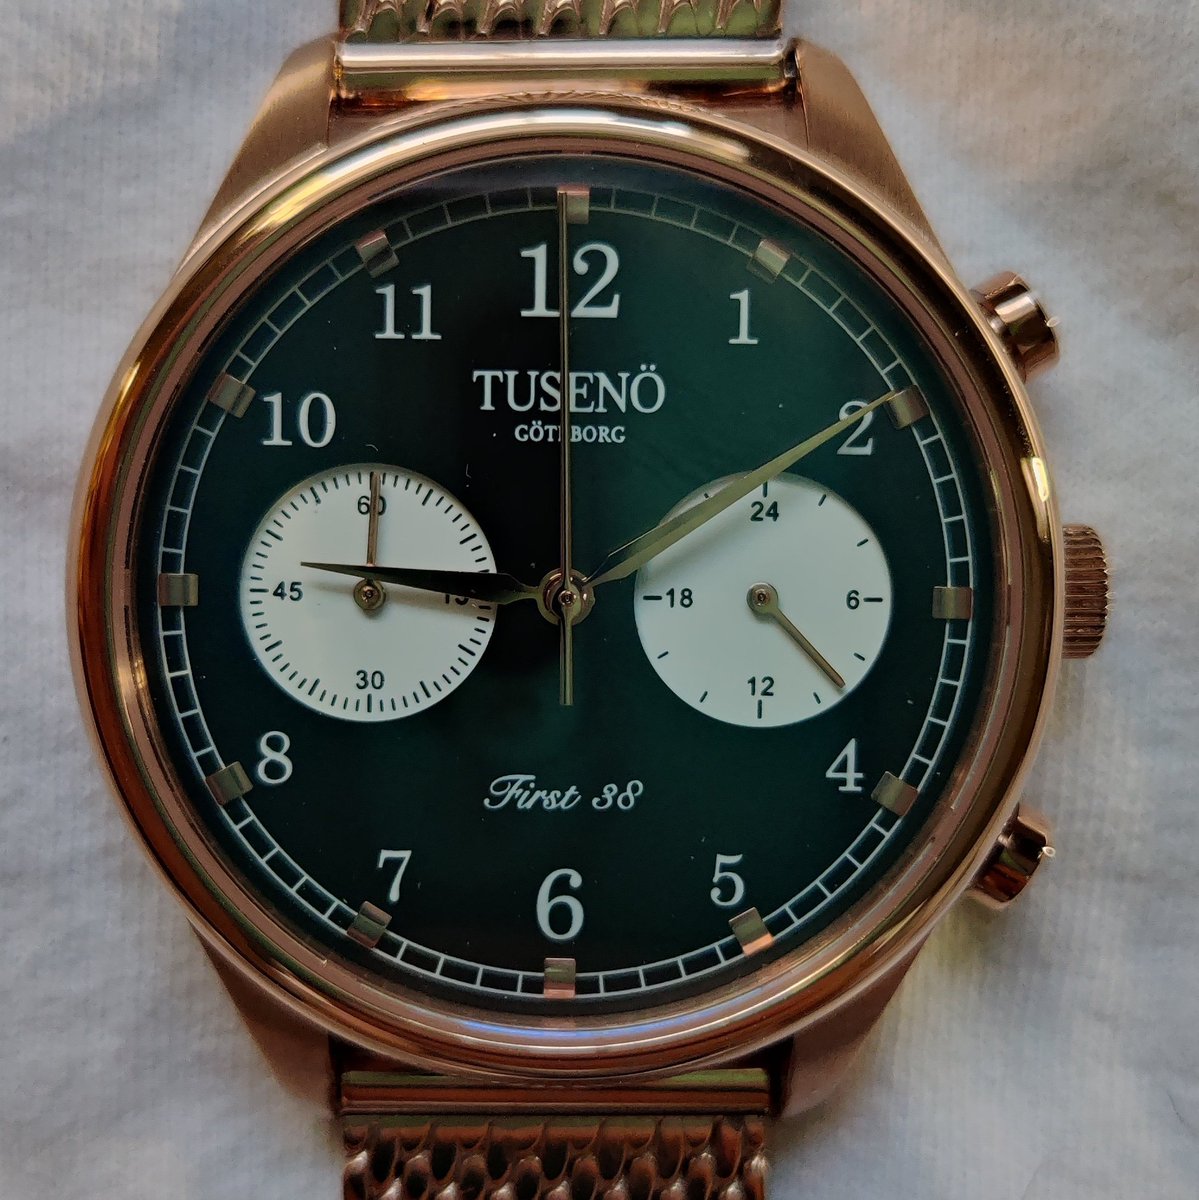 Tusenö First 38. Great choice and ultra rare. 

See my review on my YouTube channel:
youtu.be/l47PXSGsAm4

#tusenowatches #swedishwatch #microbrandwatch #wristwatch #watches #watchesofinstagram #watchphotography #watchreview #wristwatchreview #goldwatch